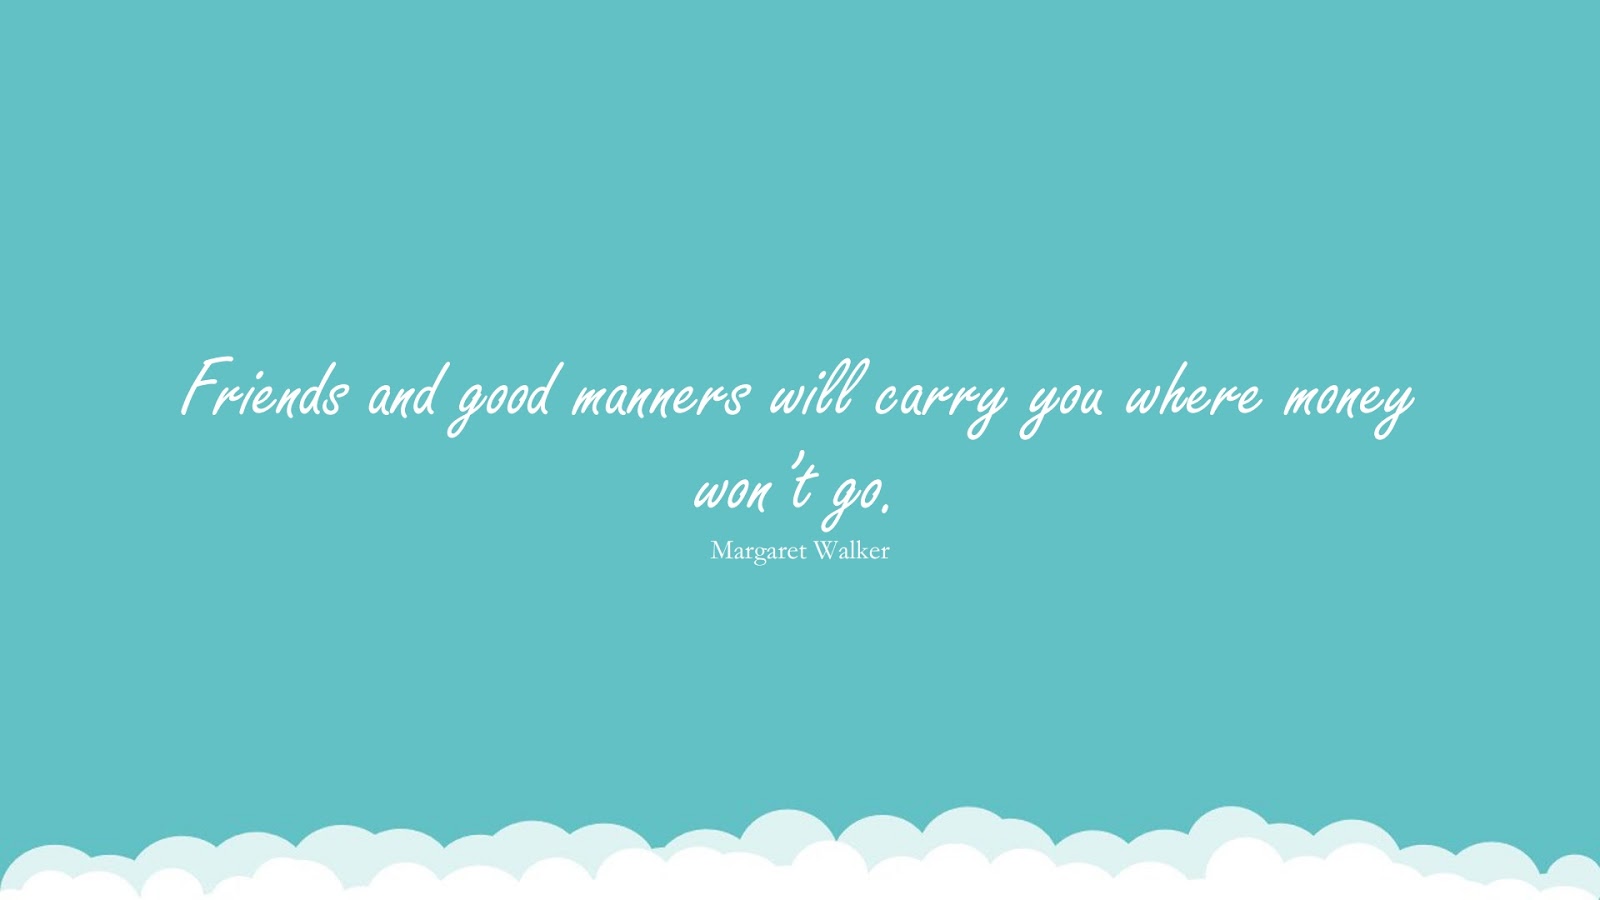 Friends and good manners will carry you where money won’t go. (Margaret Walker);  #MoneyQuotes